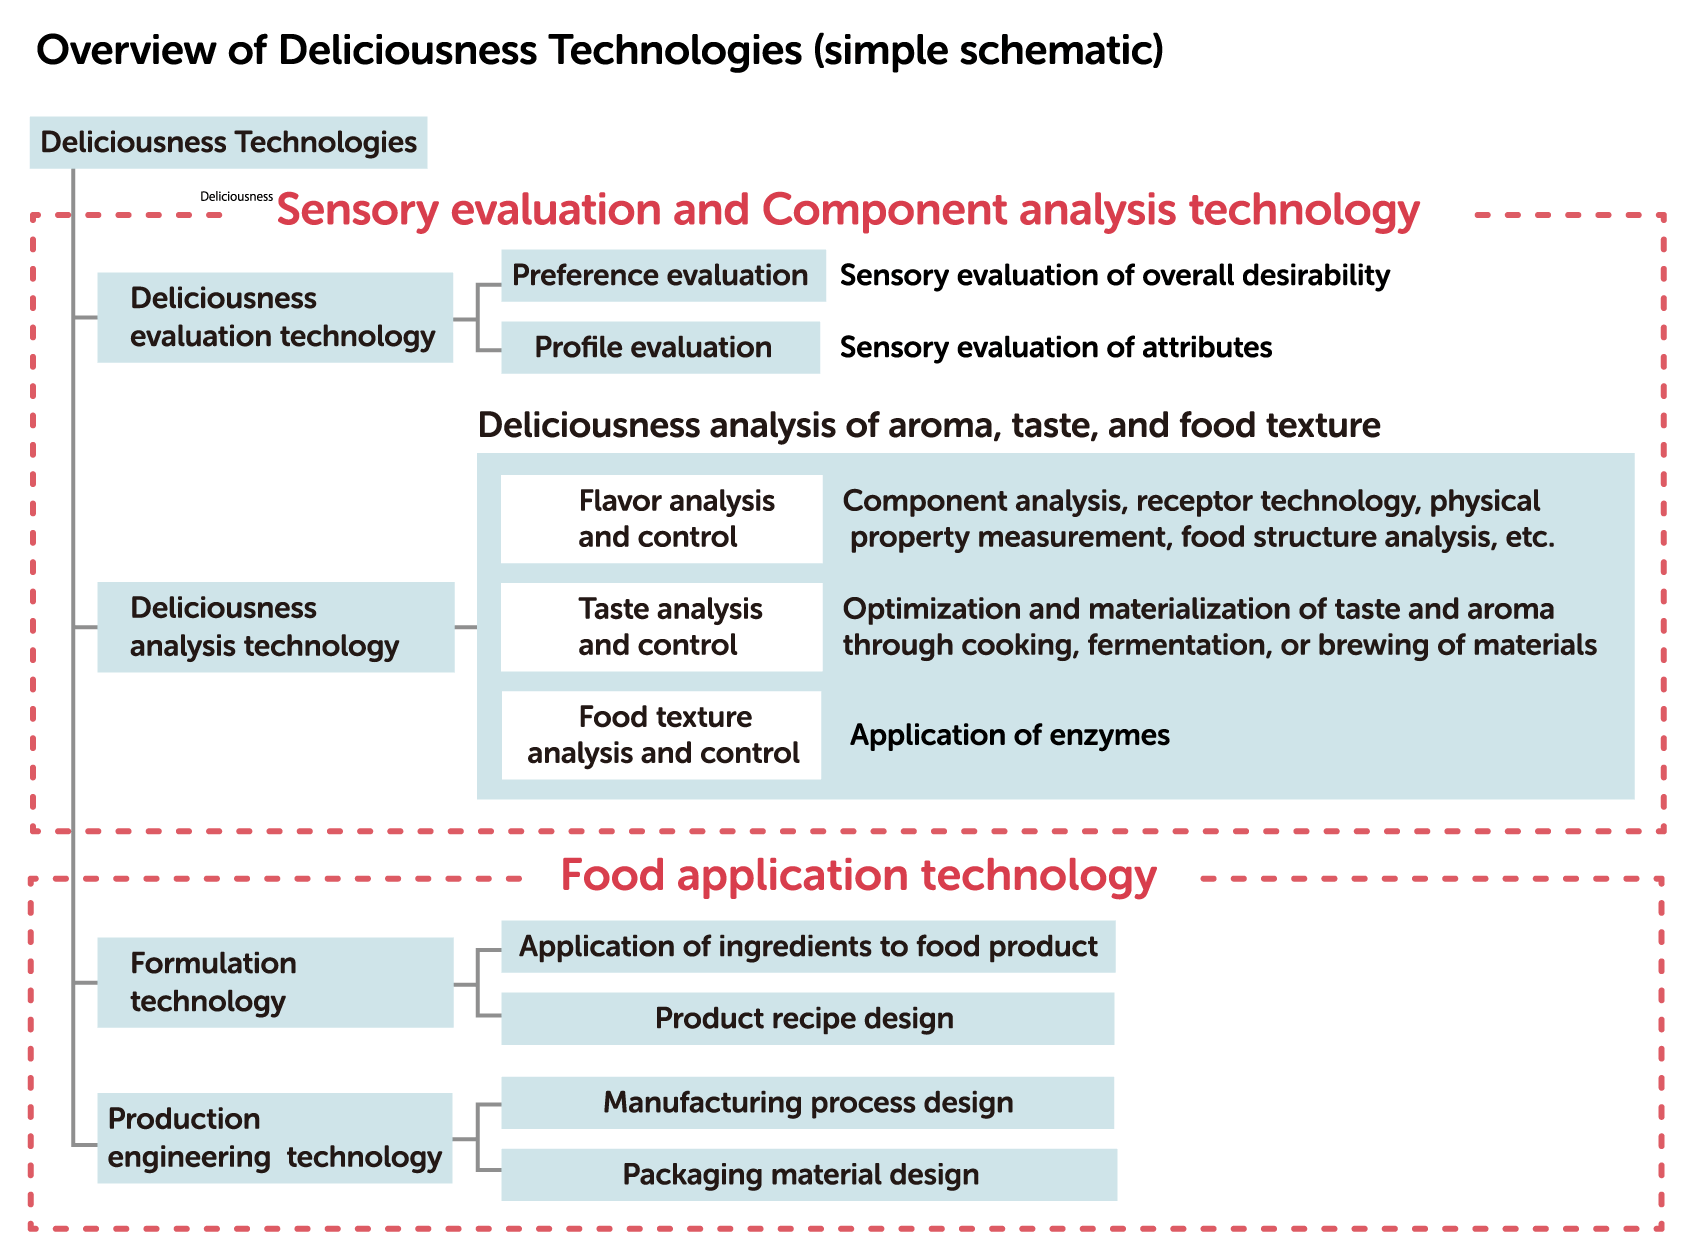 Overview of Deliciousness Technologies (simple schematic)